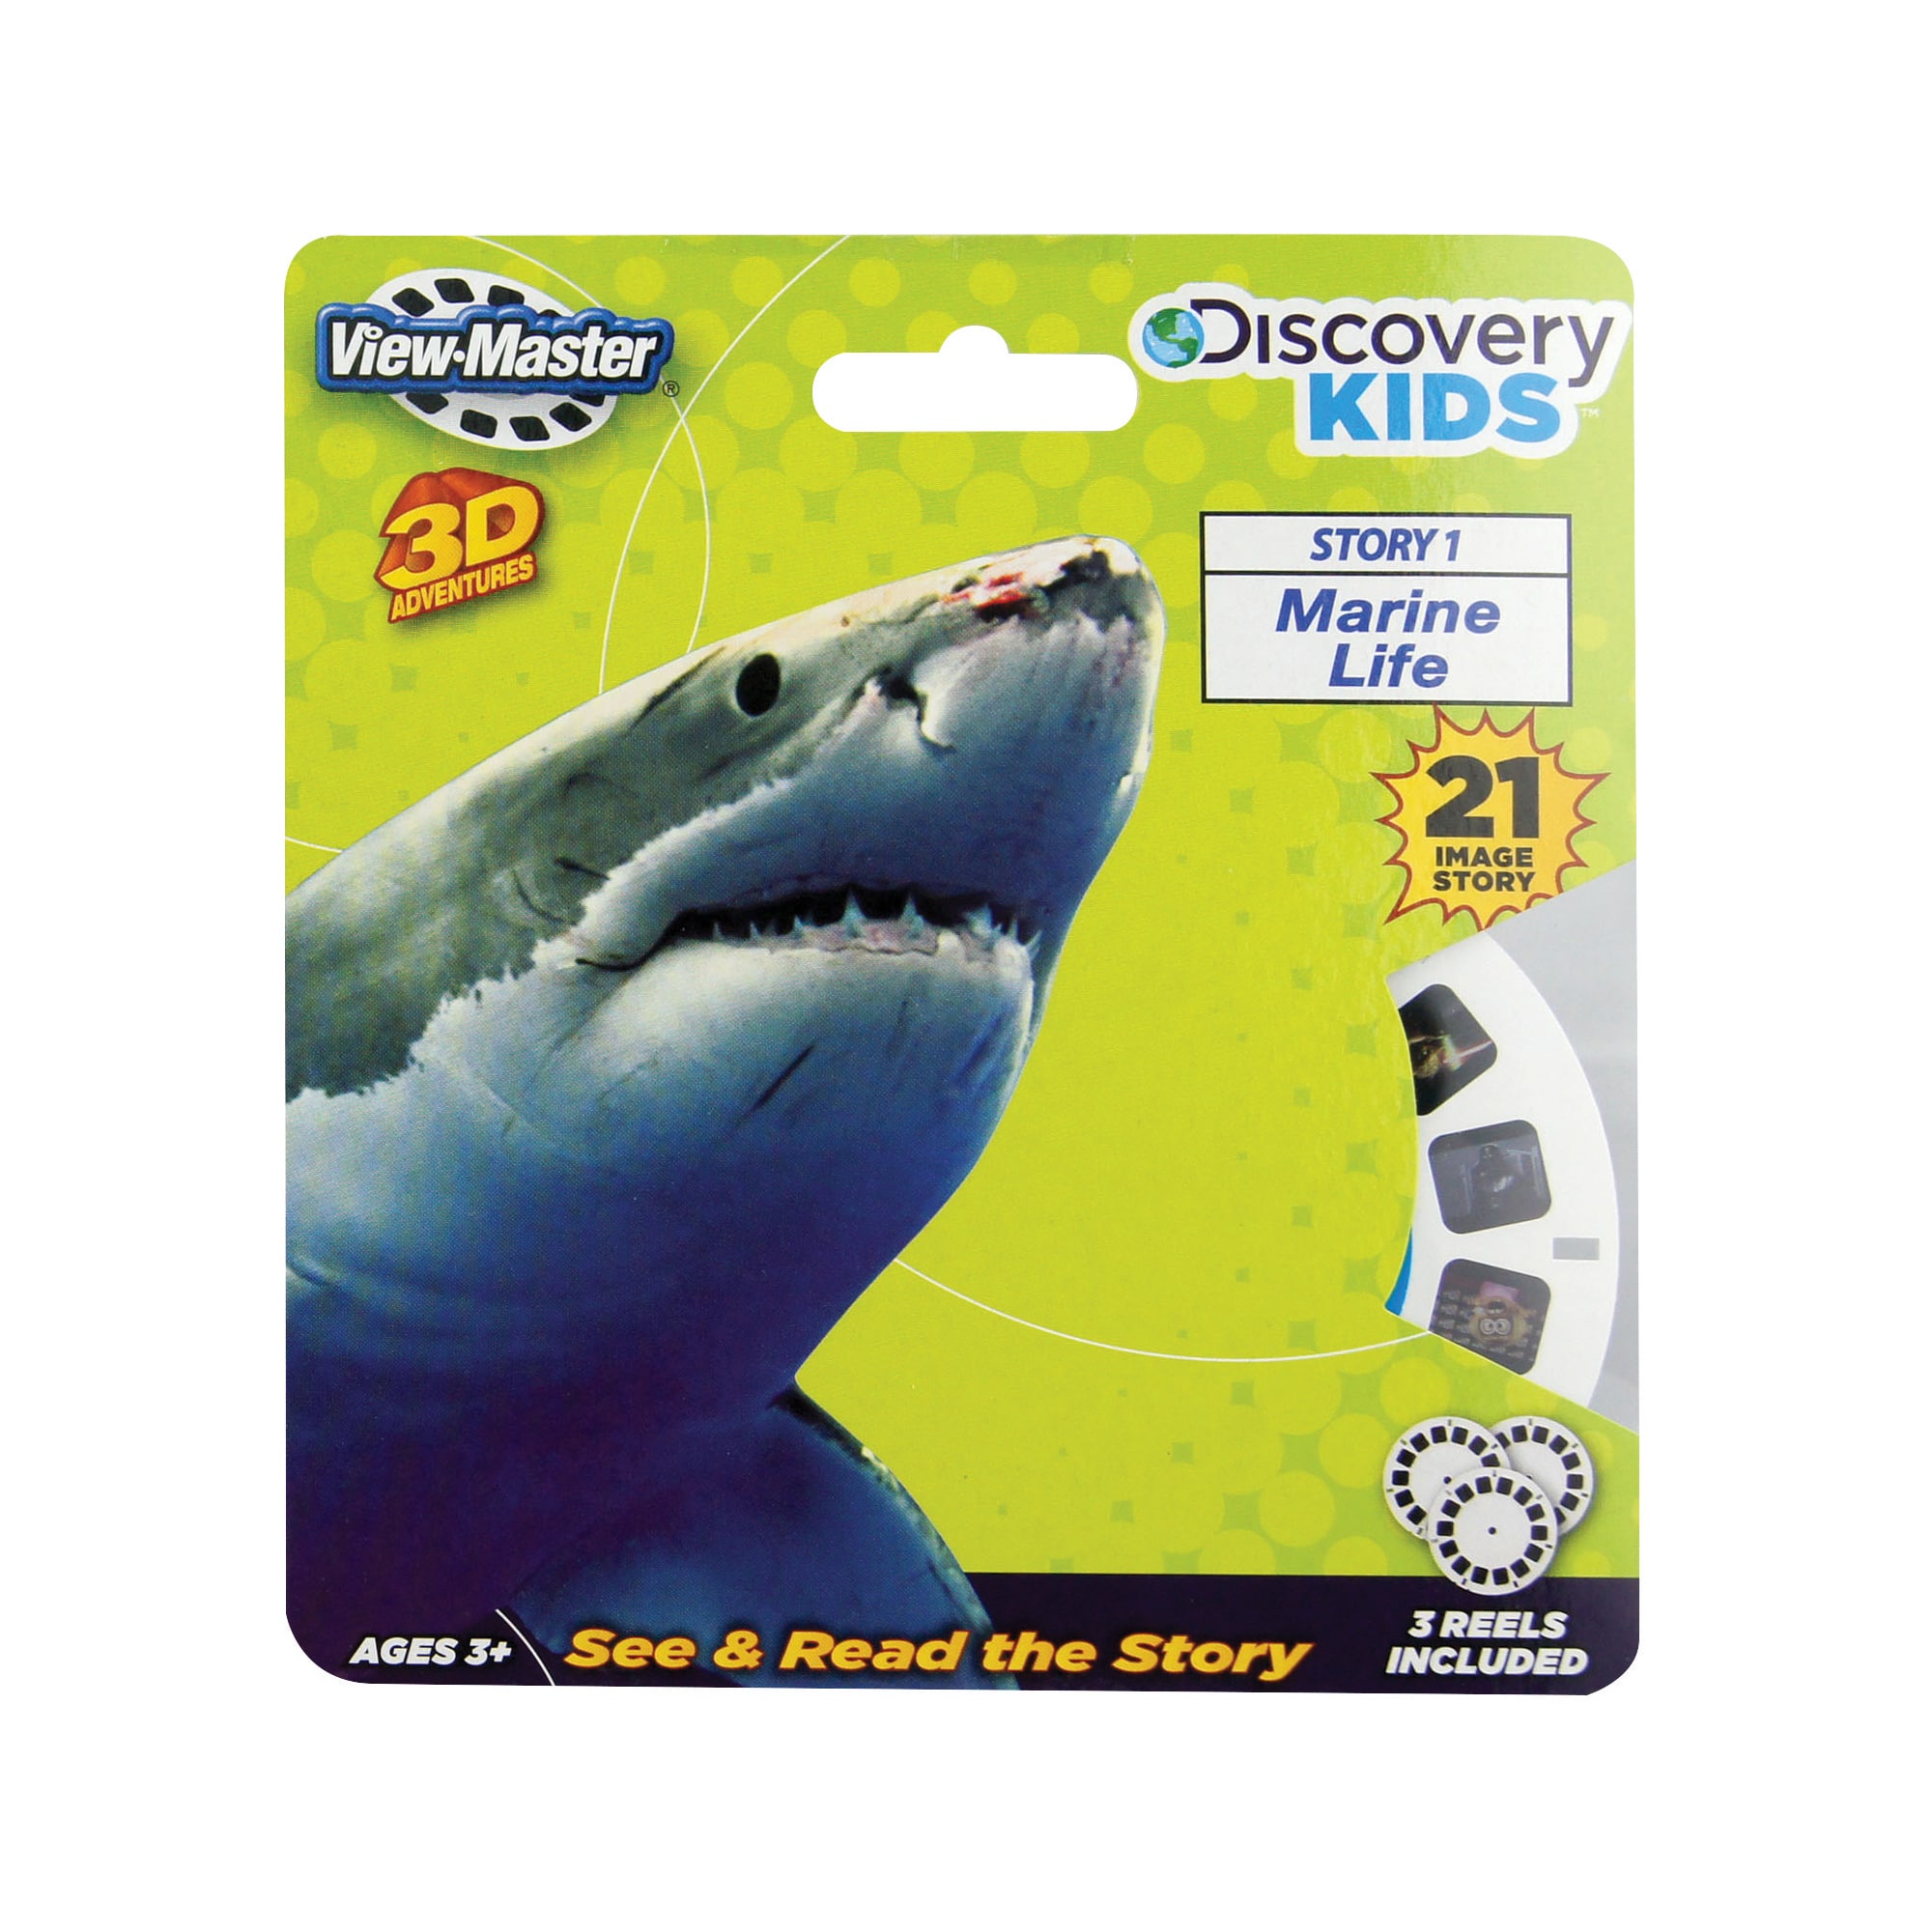 View Master 3D Favorites - Sharks and other Dangers of the Deep